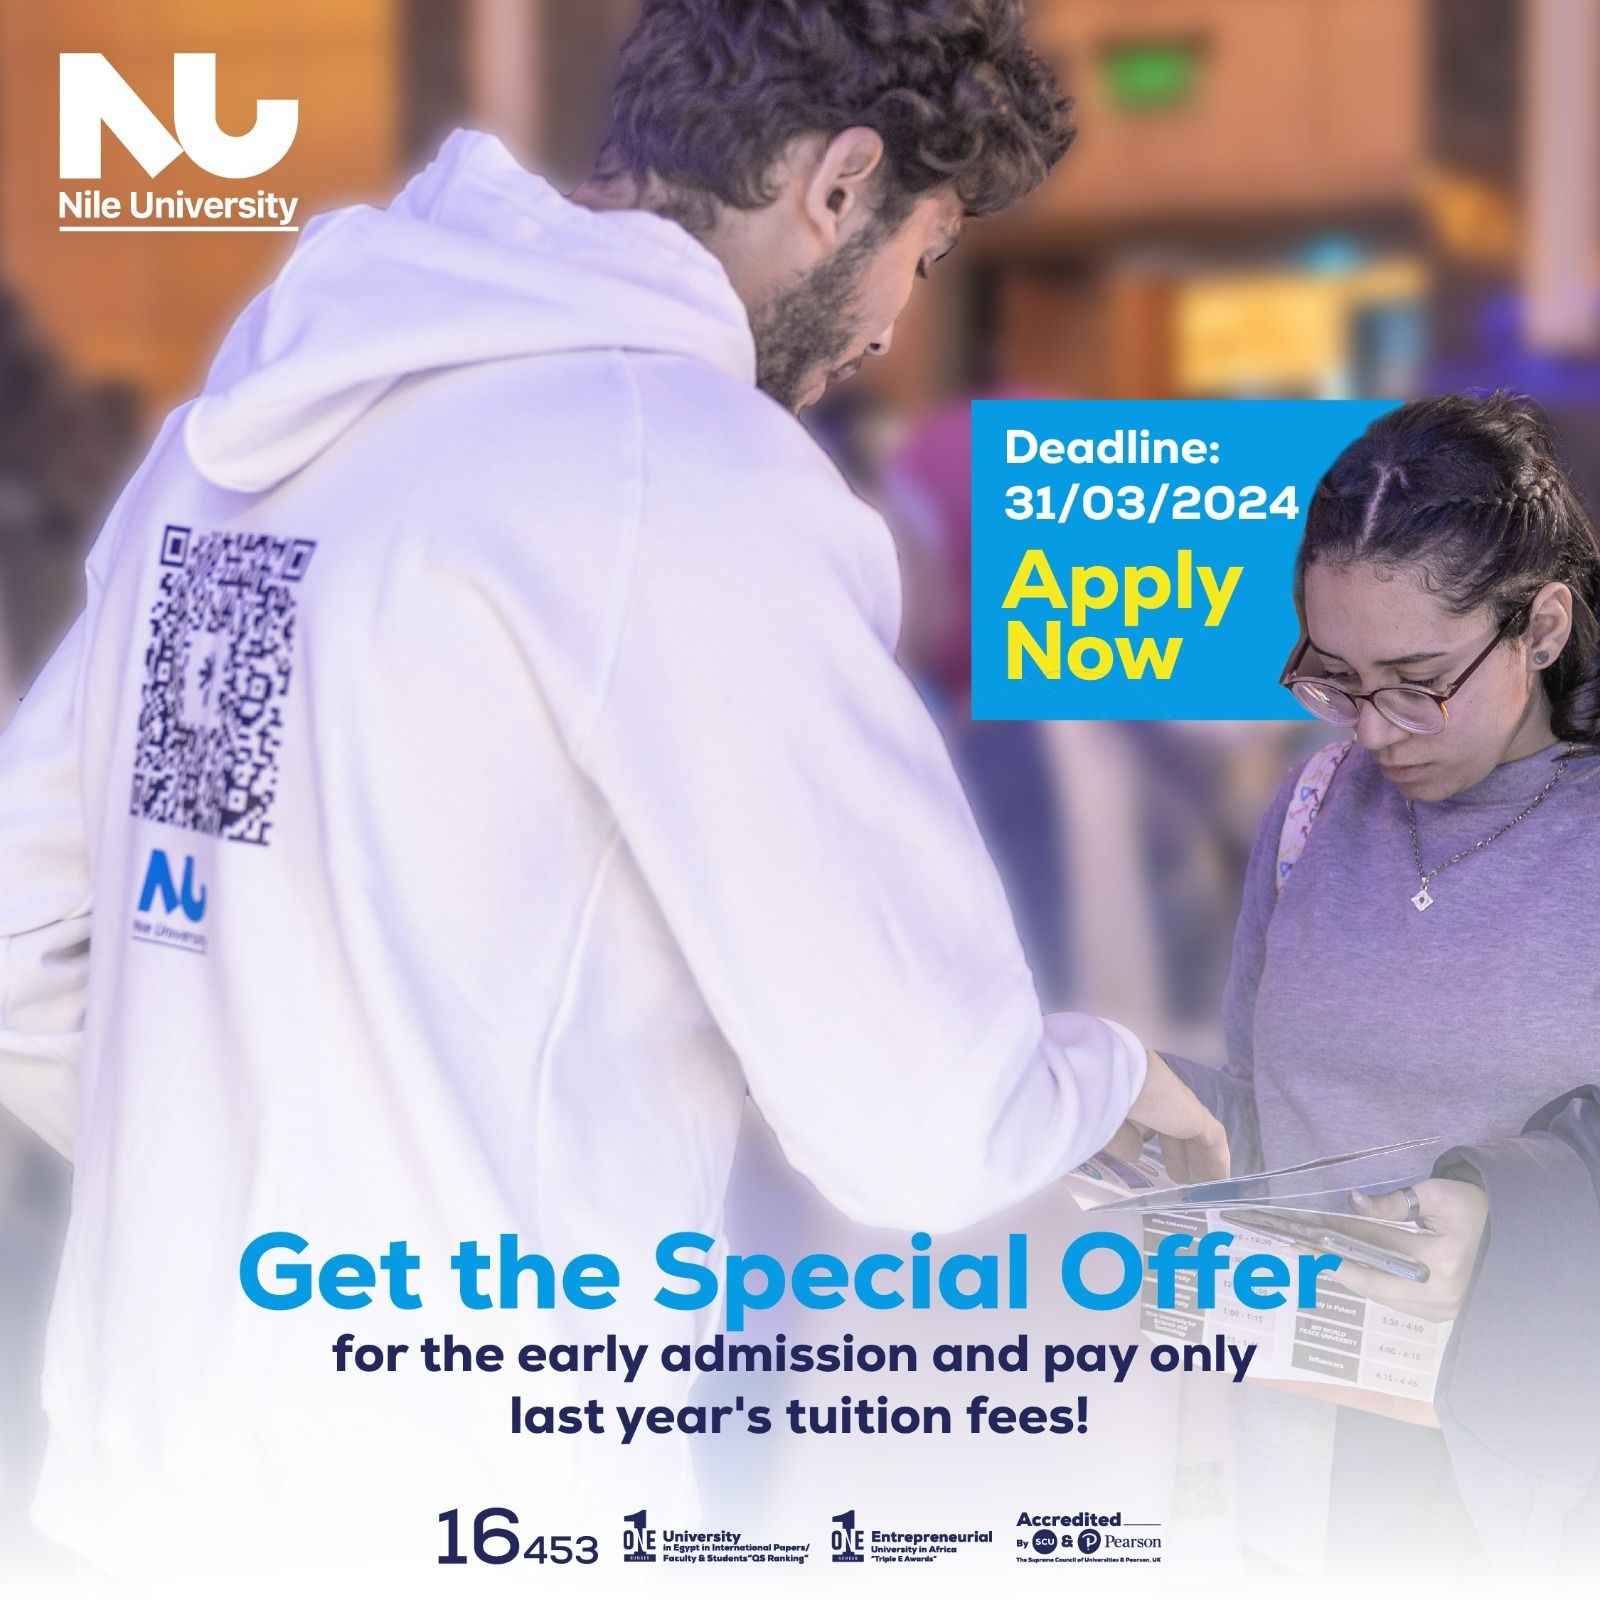 The special offer for early admission to apply before 31/03/2024